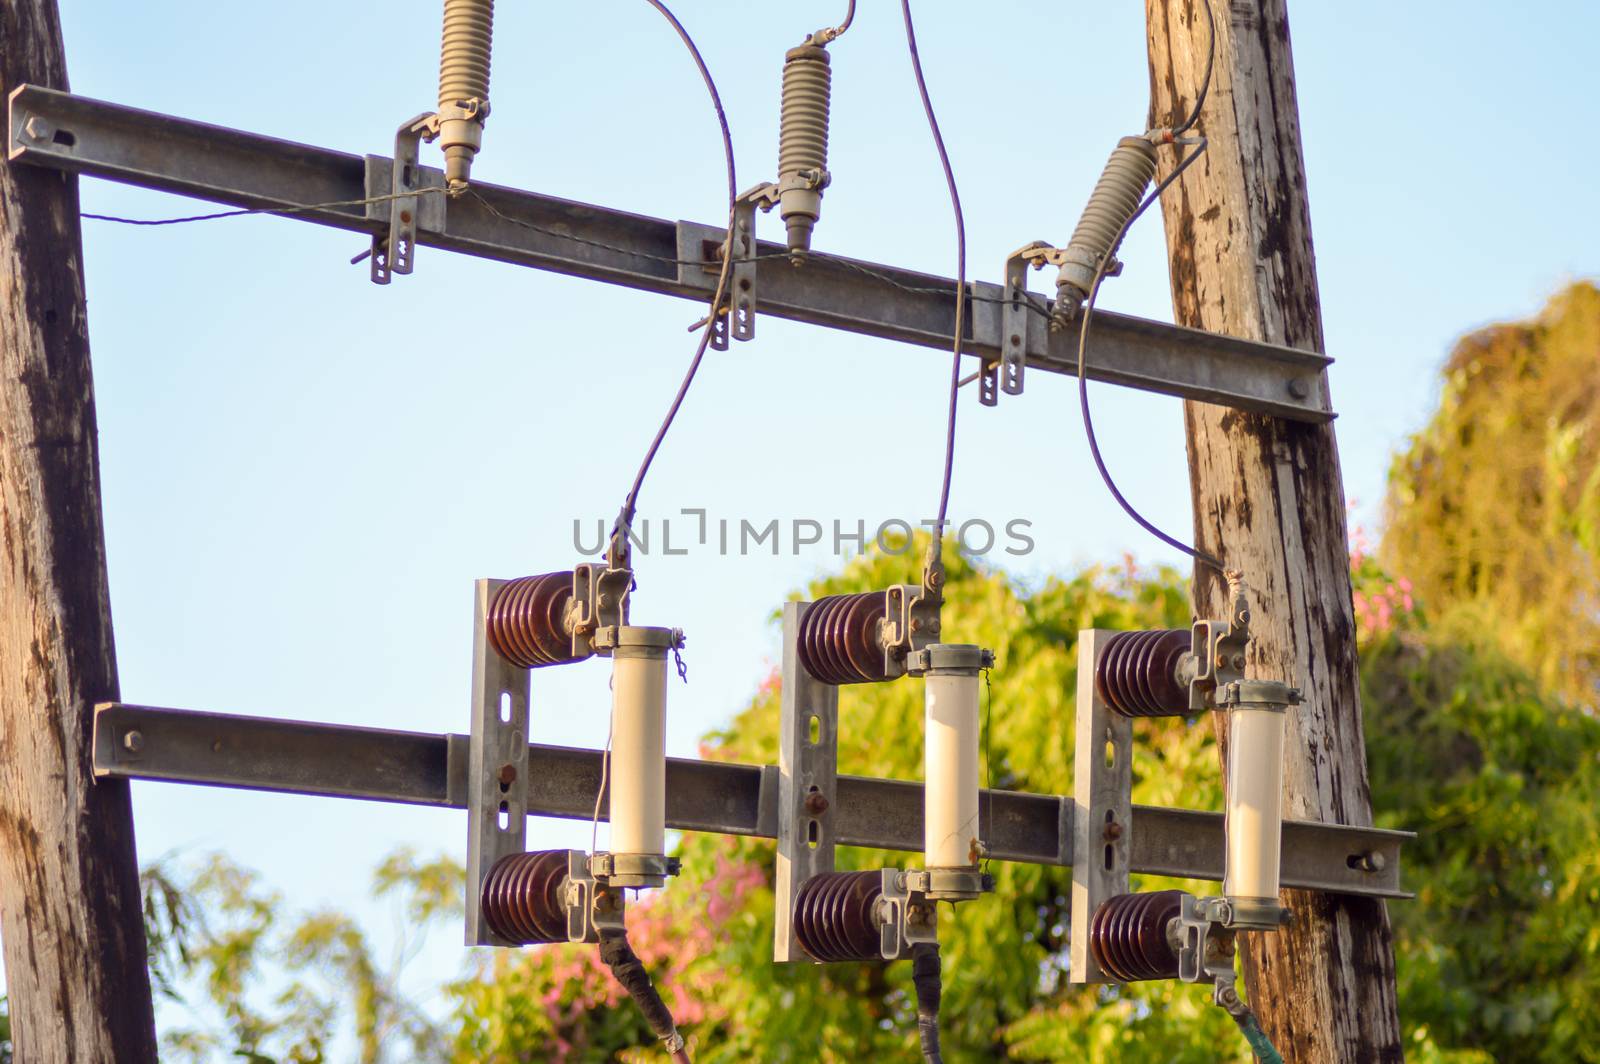 Cartridge fuses attach to a wooden pylon with insulators